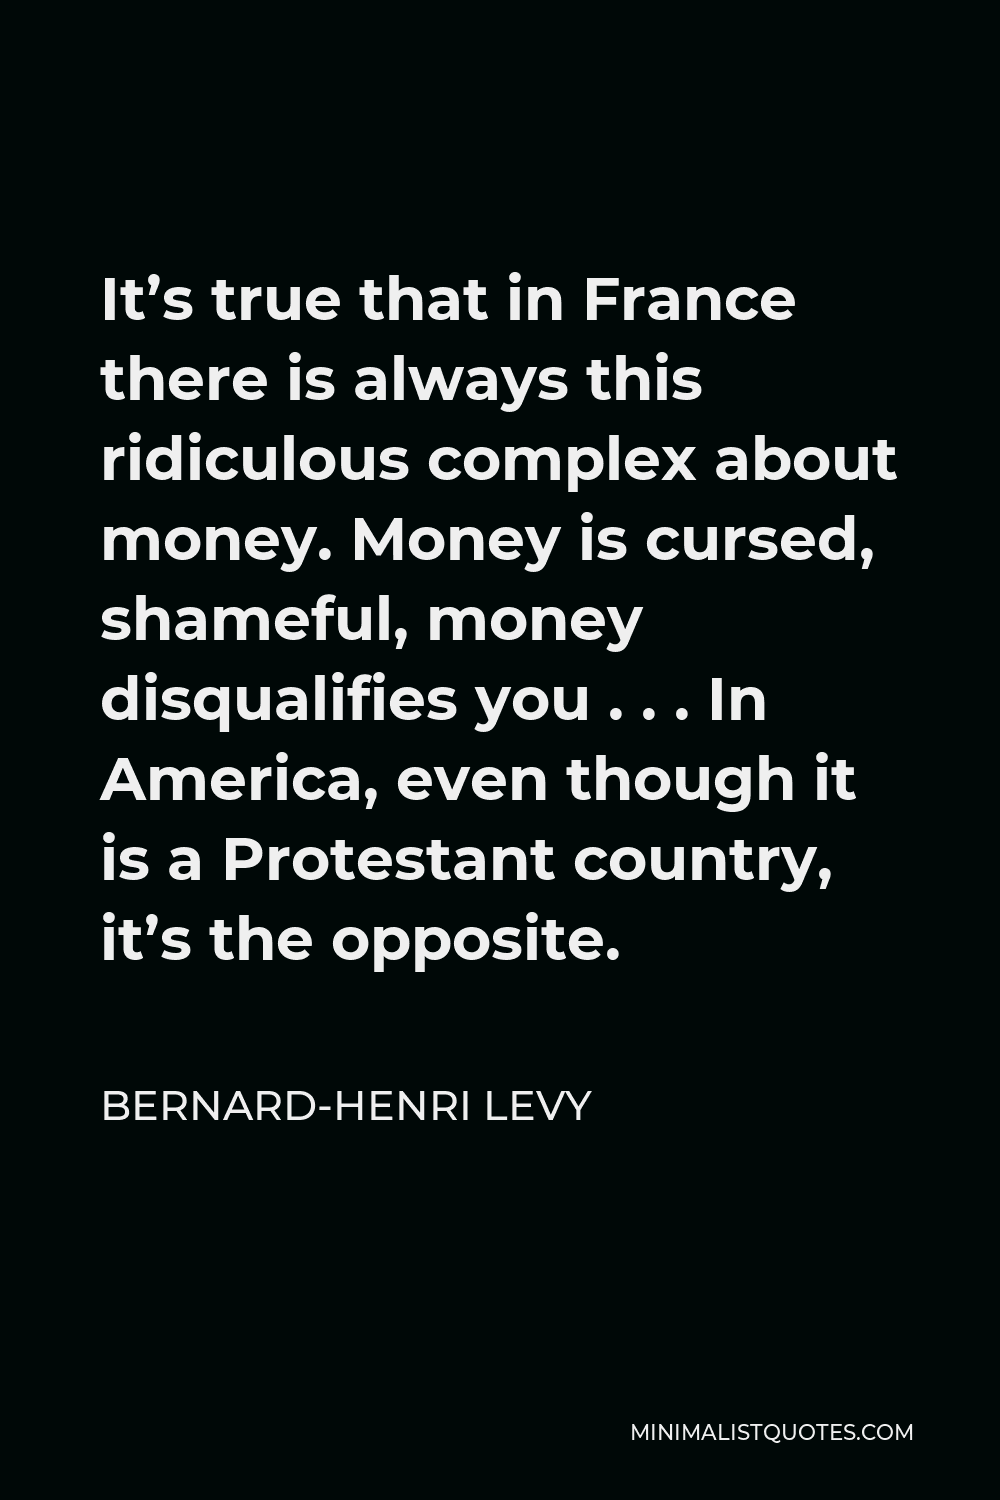 Bernard-Henri Levy Quote - It’s true that in France there is always this ridiculous complex about money. Money is cursed, shameful, money disqualifies you . . . In America, even though it is a Protestant country, it’s the opposite.